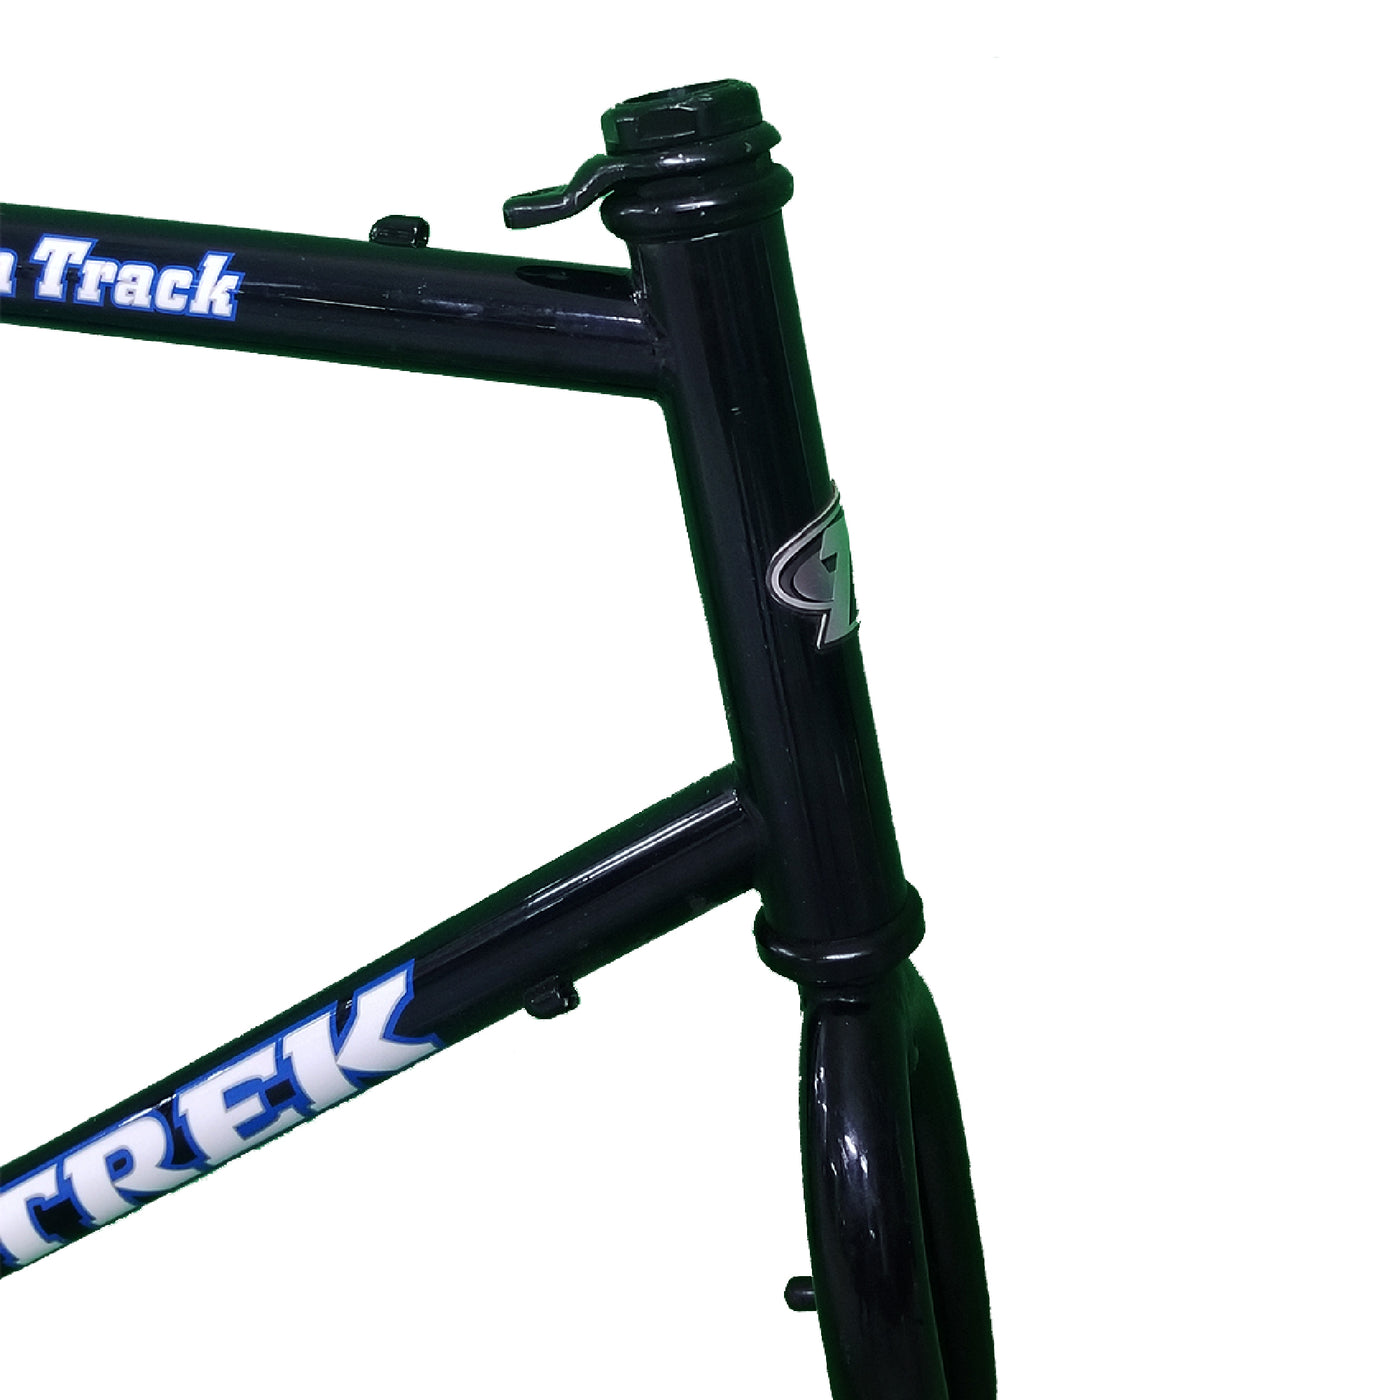 1997 Trek Mountain-Track 820 Bicycle Frame Size 57cm Made in USA